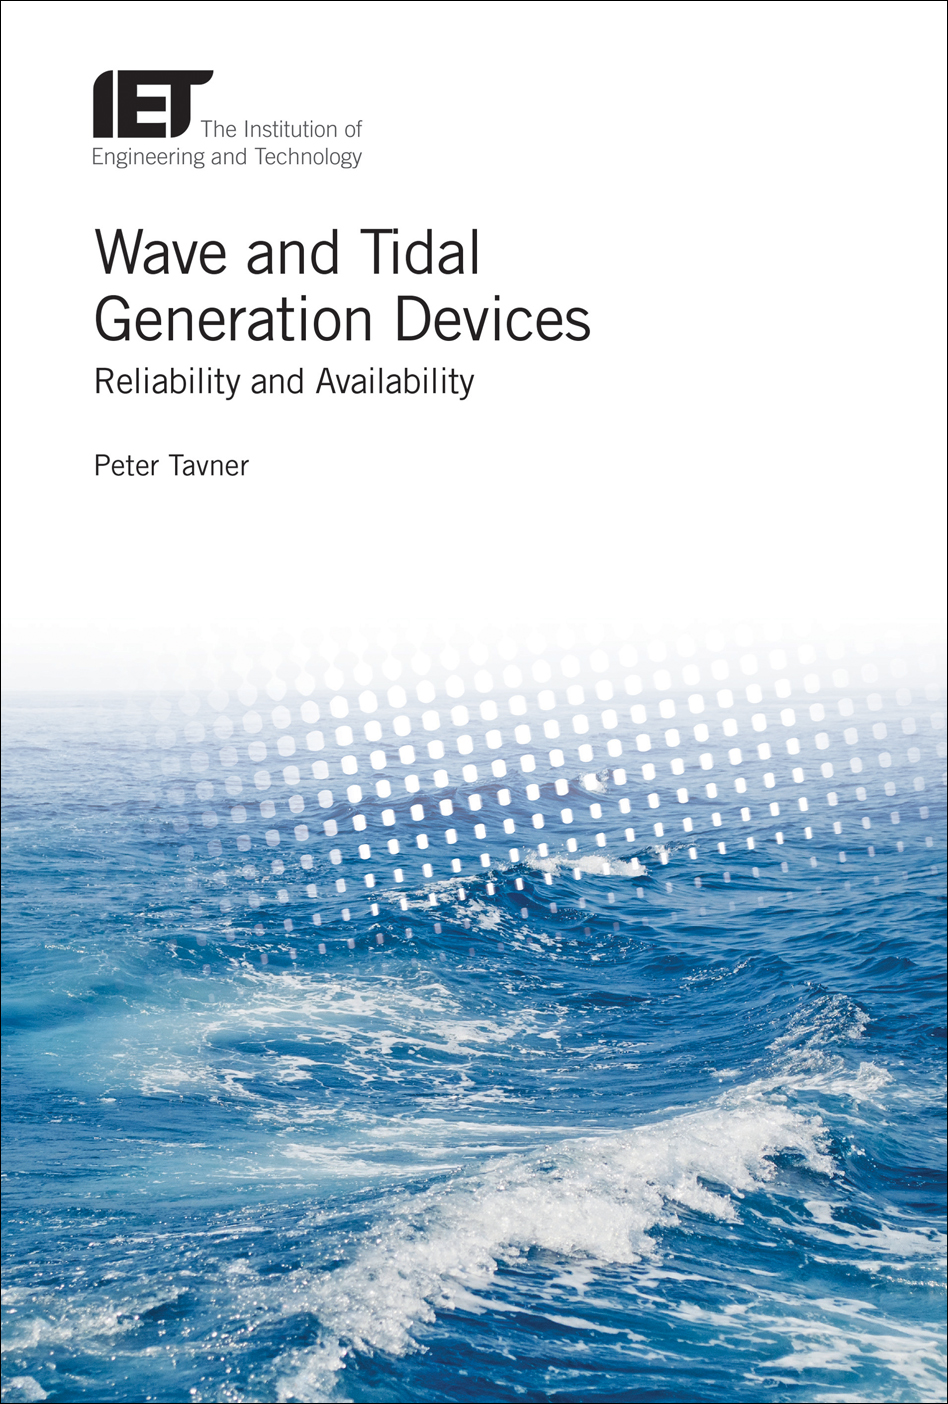 Wave and Tidal Generation Devices, Reliability and availability